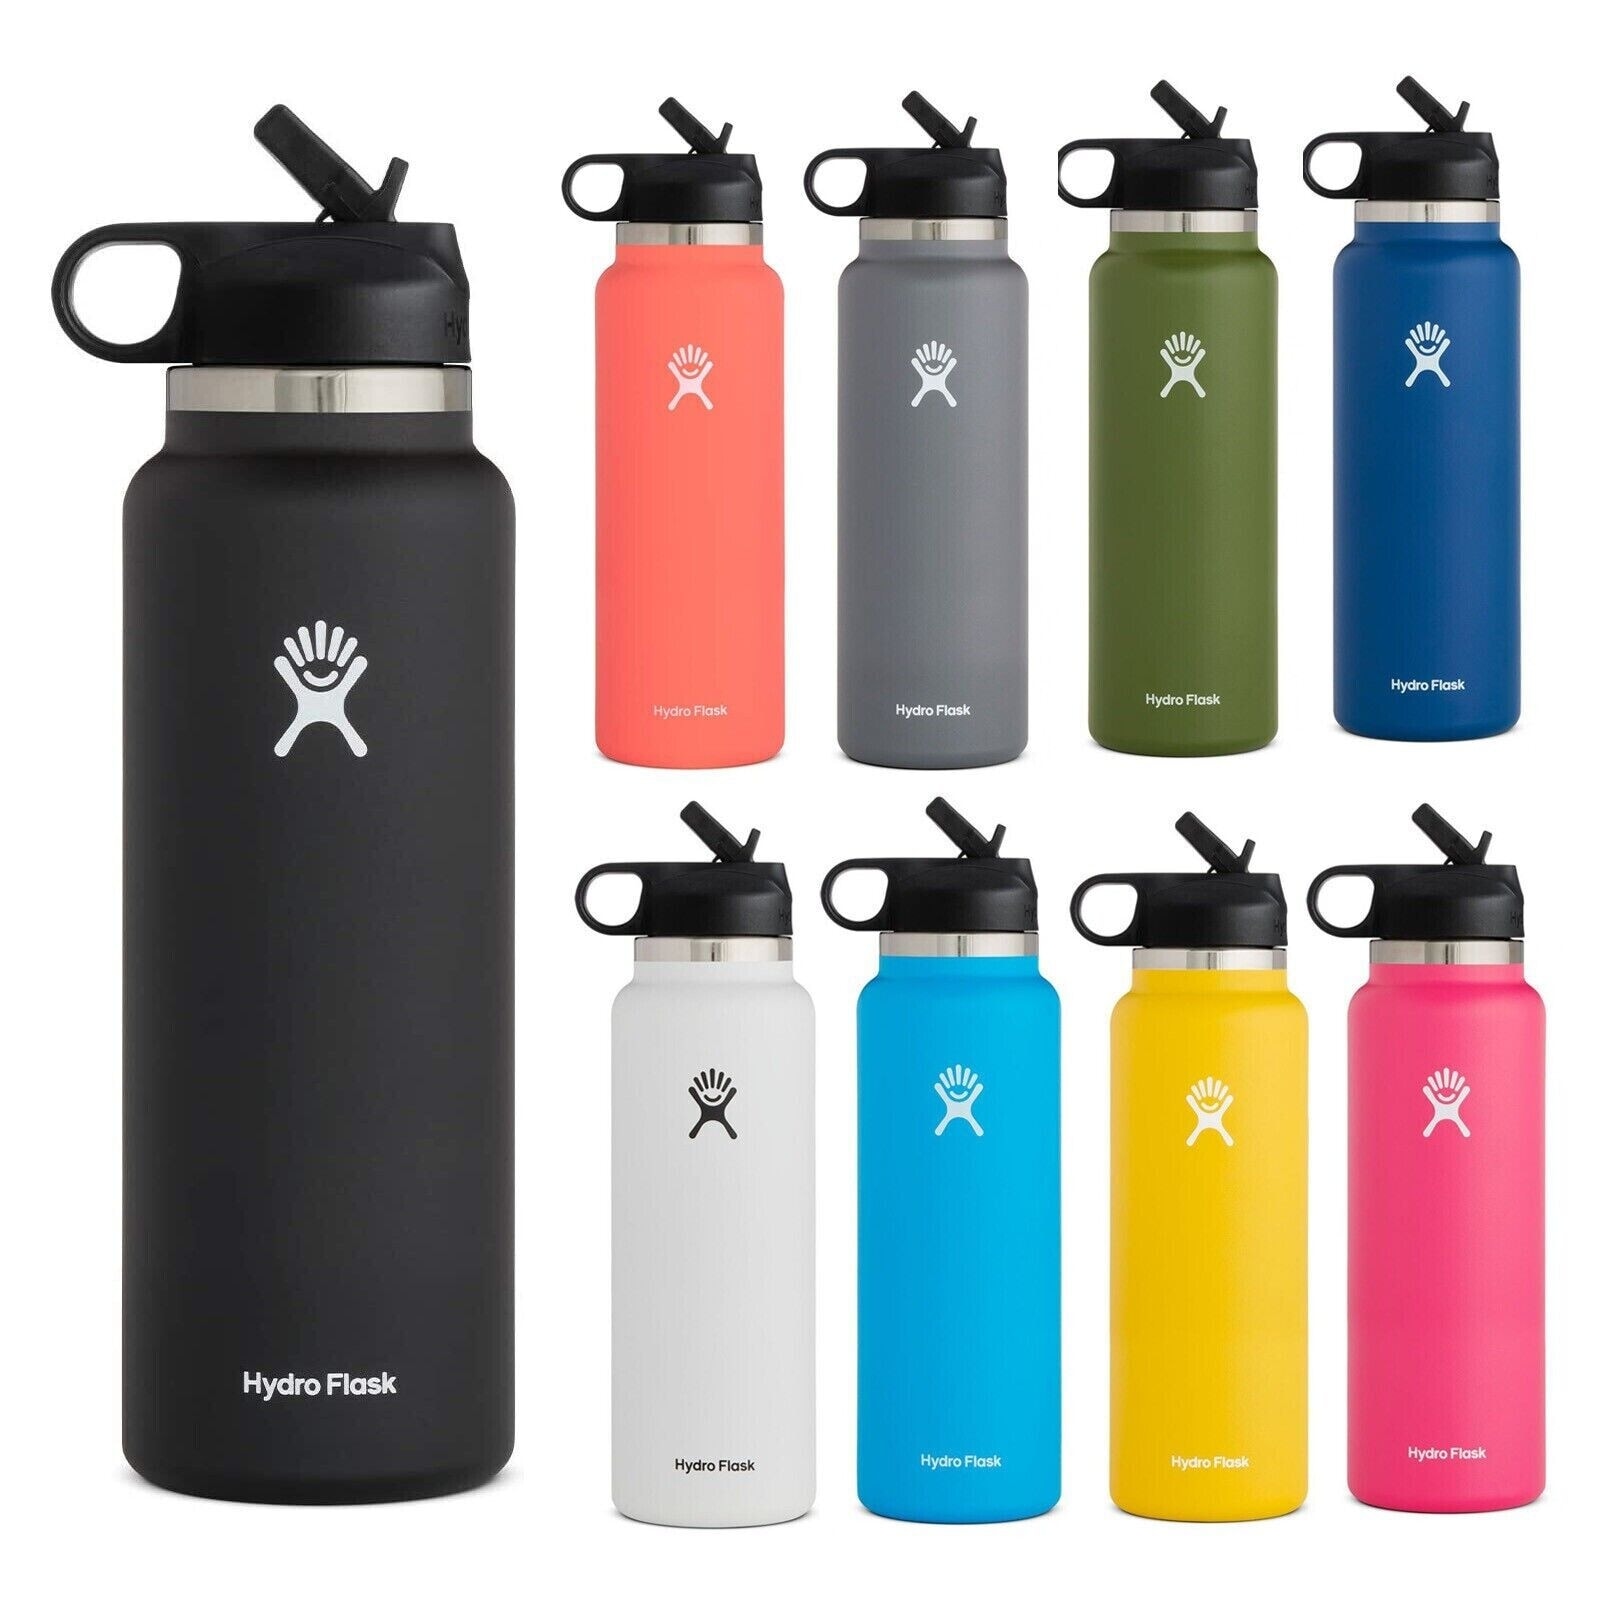 https://ak1.ostkcdn.com/images/products/is/images/direct/baf3c79f330fc8a9fc8c874ea9128dbe1ef65b27/Hydro-Flask-20-32oz-Stainless-Steel-Wide-Mouth-Water-Bottle-with-Straw.jpg